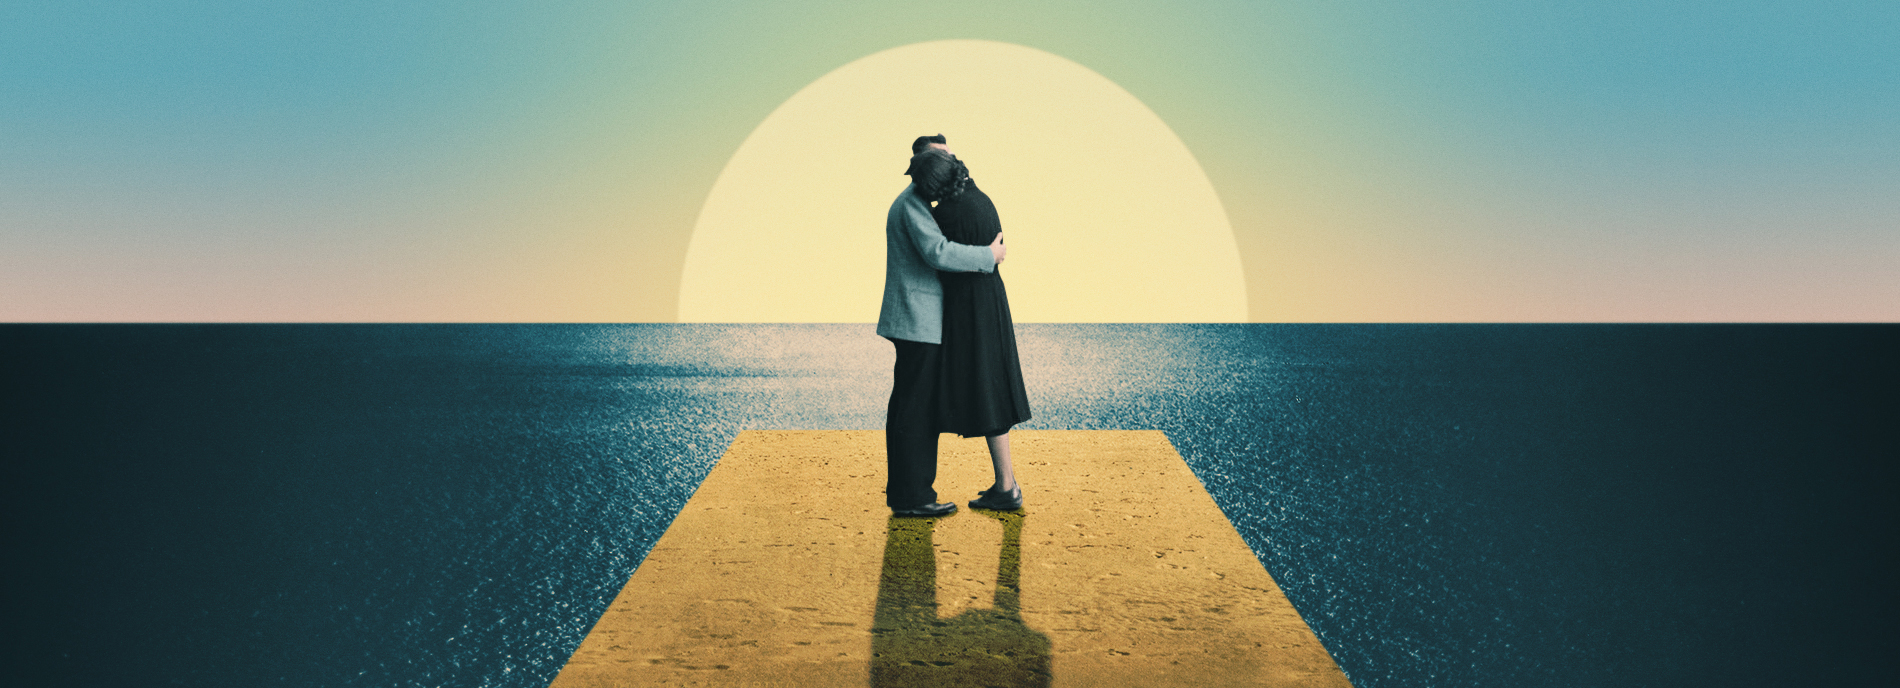 A man and woman kiss under a sunset within a surreal environment, suggesting the surreal nature of studying romantic love within the autism spectrum.